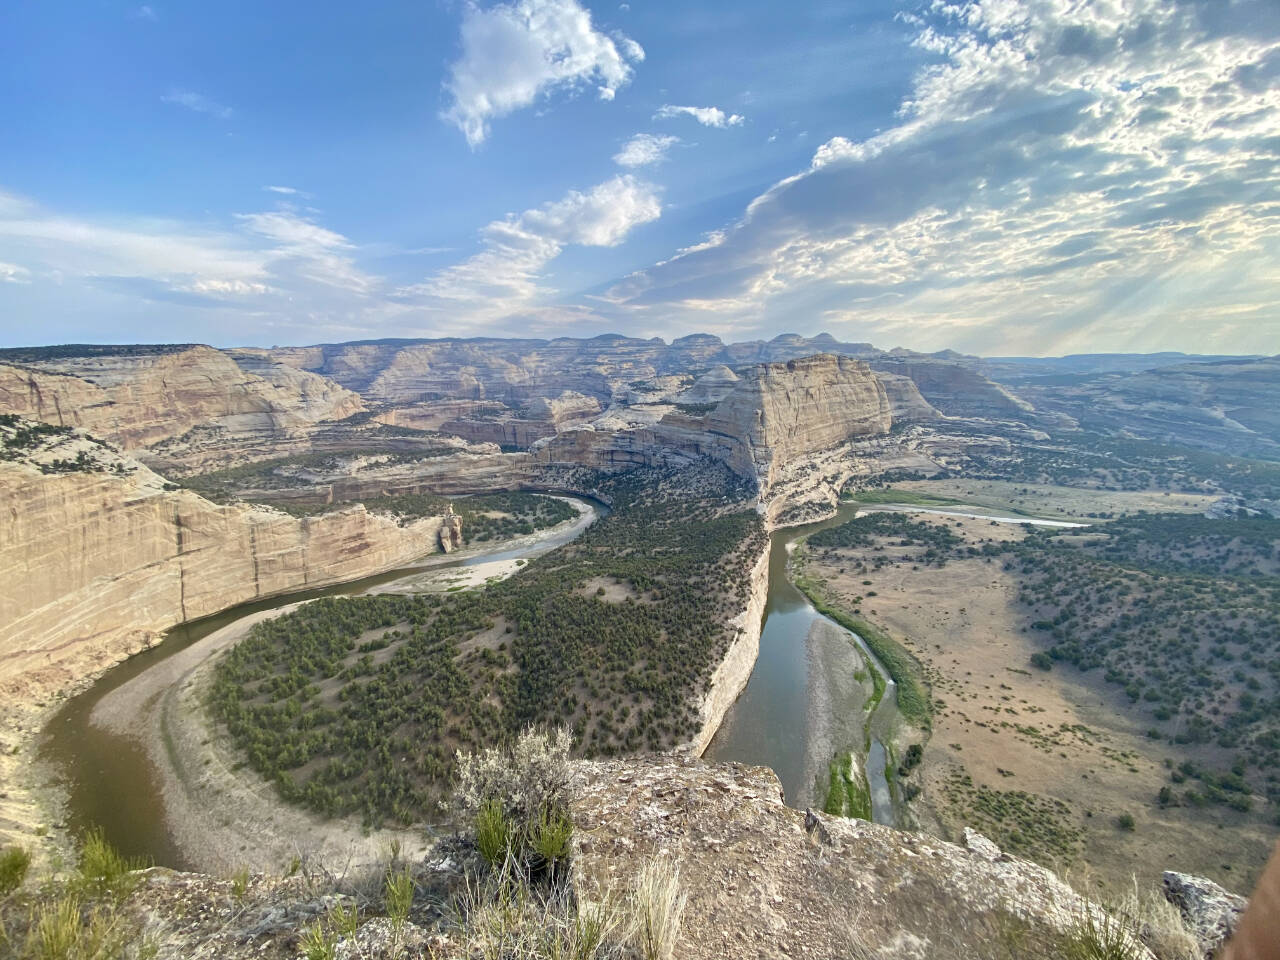 Photos courtesy of Kevin Koski
The view looking North across the Yampa River in Dinosaur National Monument (Colorado).